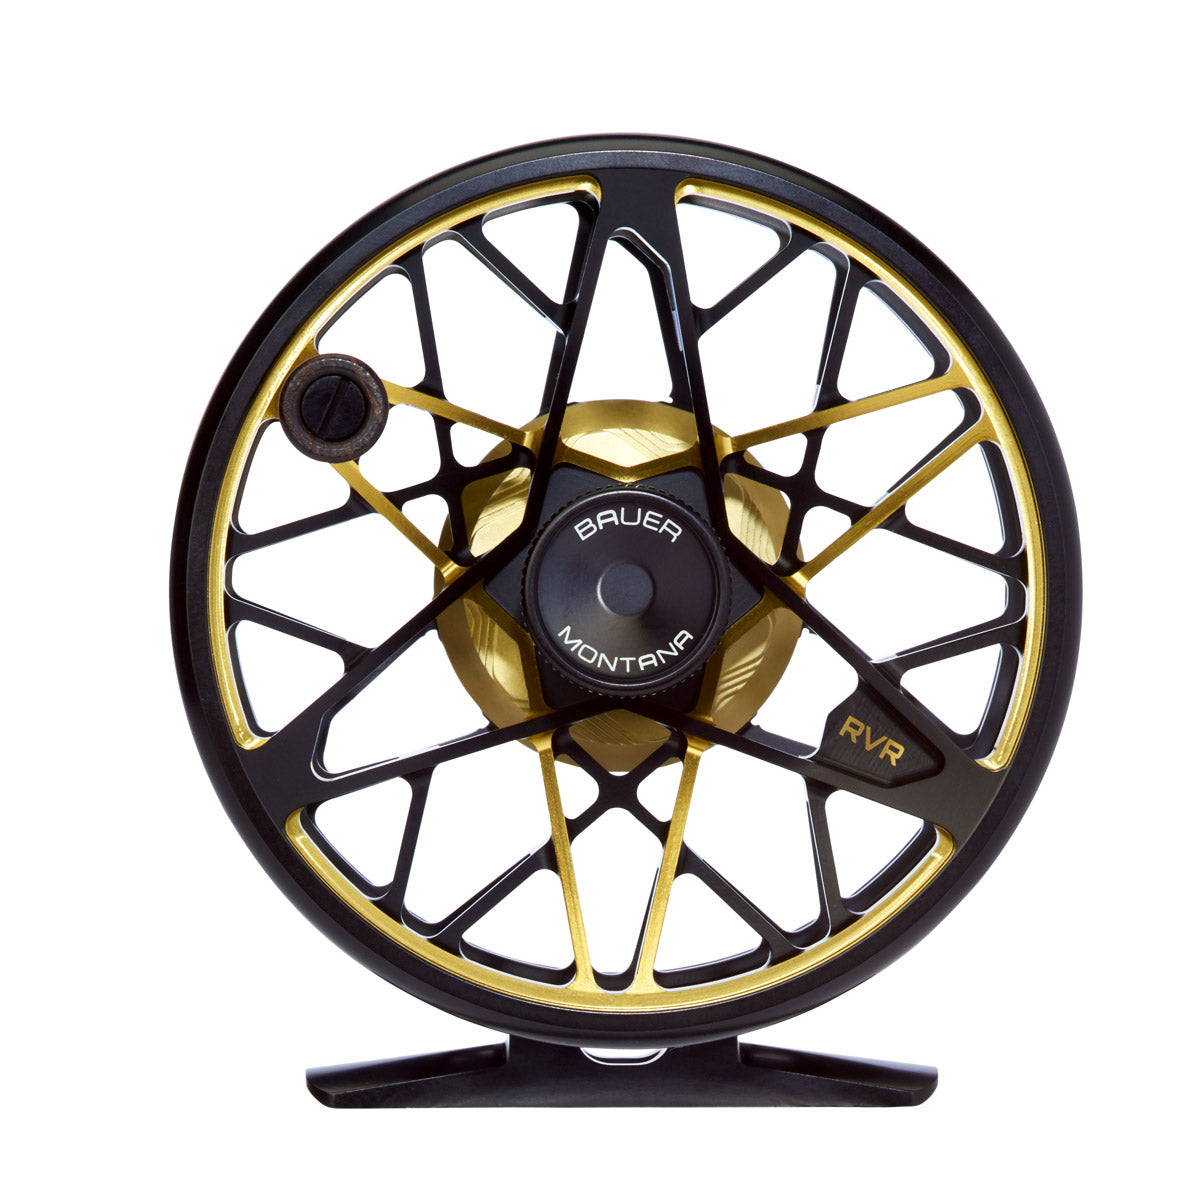 Bauer RVR Fly Fishing Reel Size 2/3 Wt Misc Bauer Fly Fishing